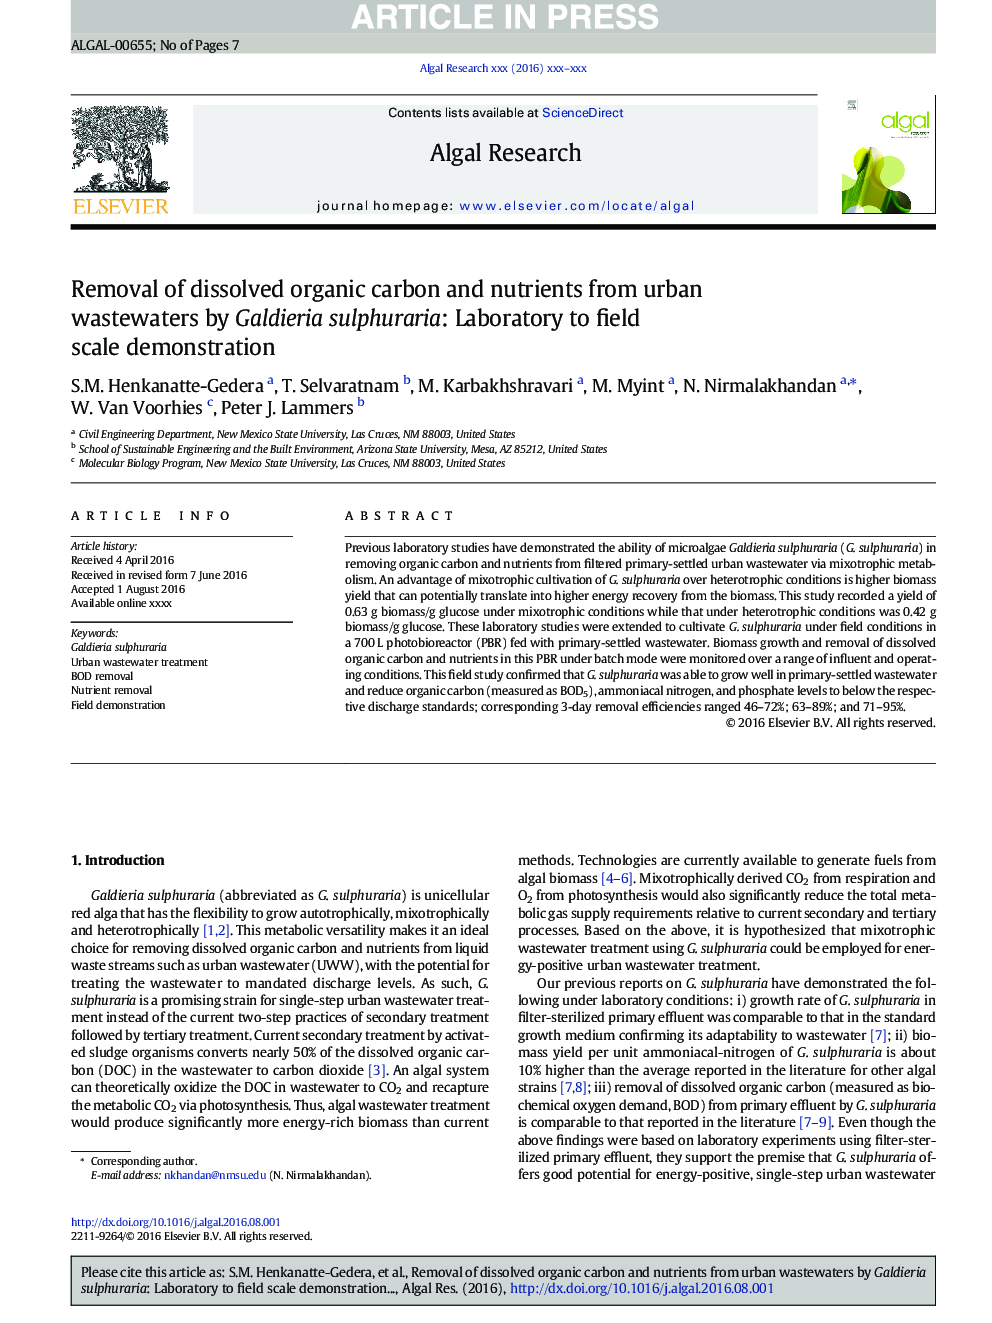 Removal of dissolved organic carbon and nutrients from urban wastewaters by Galdieria sulphuraria: Laboratory to field scale demonstration